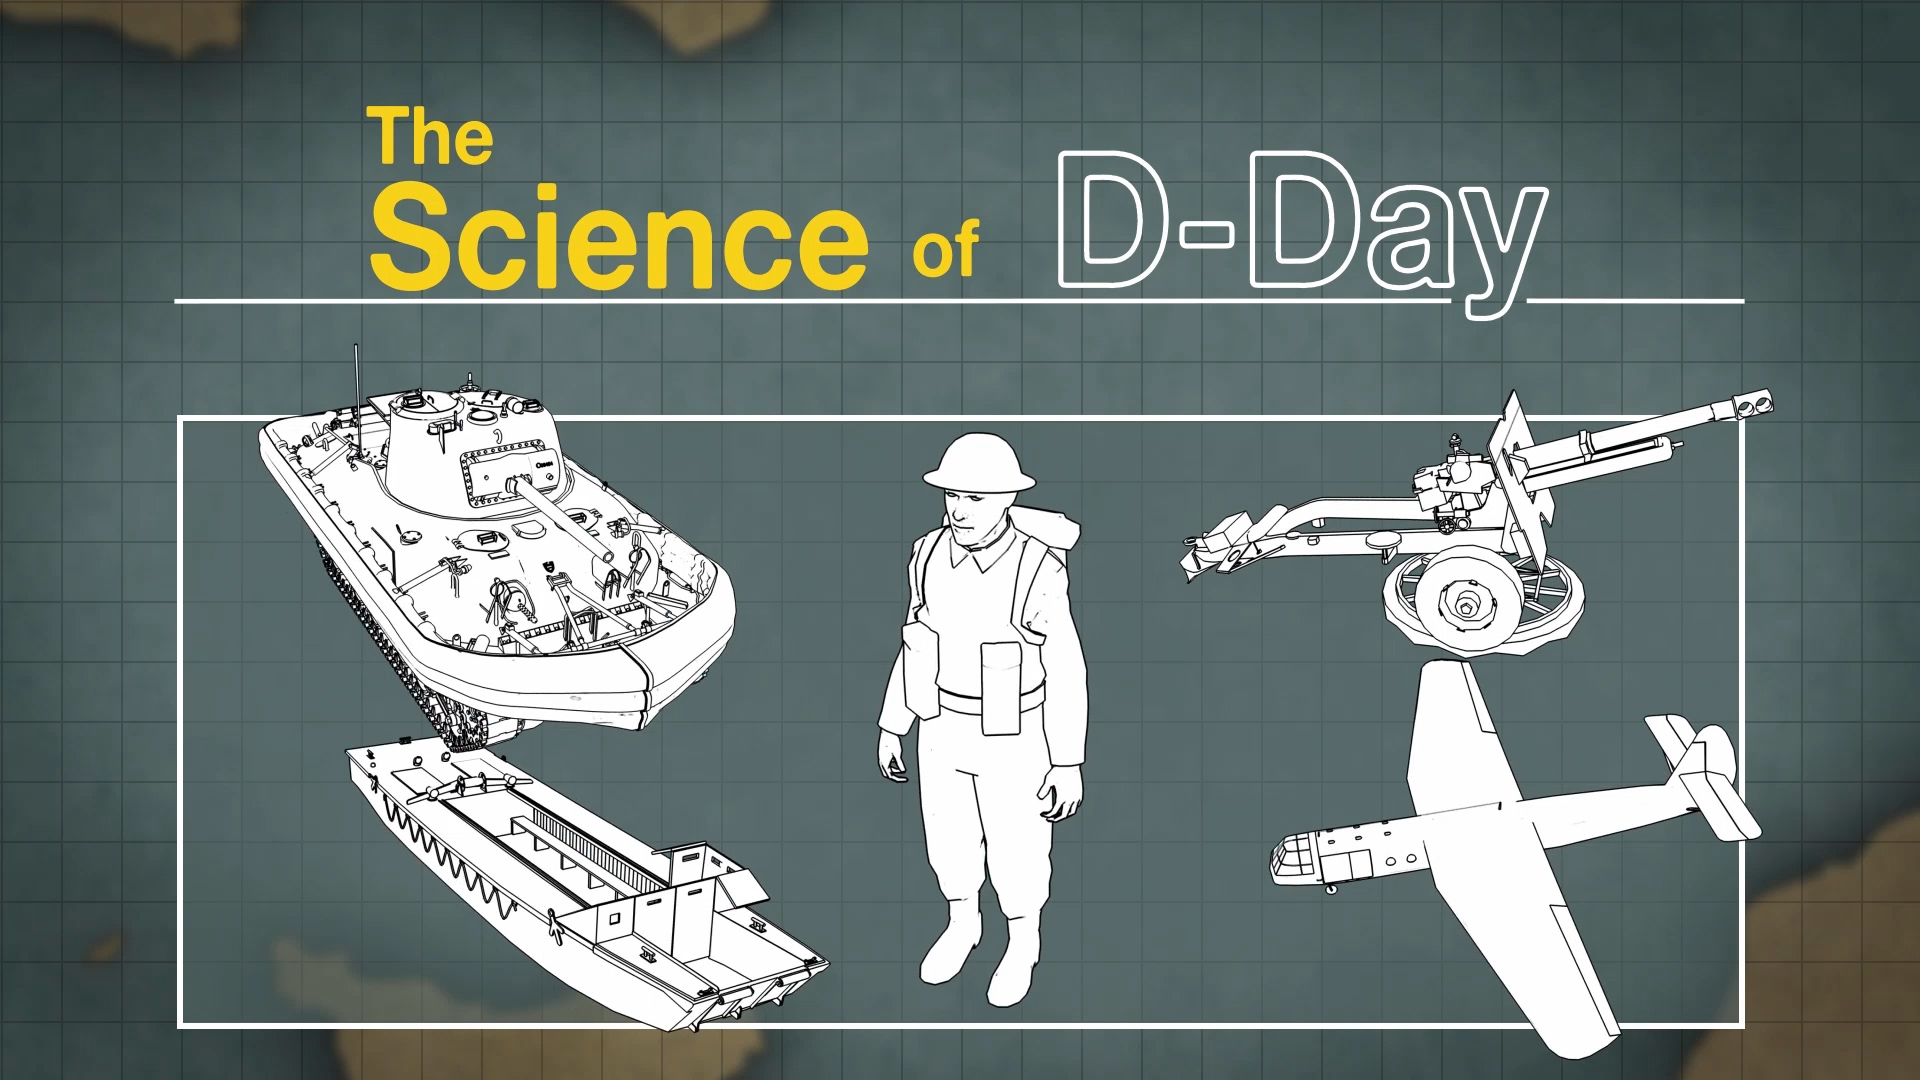 The Science of D-Day opening title image